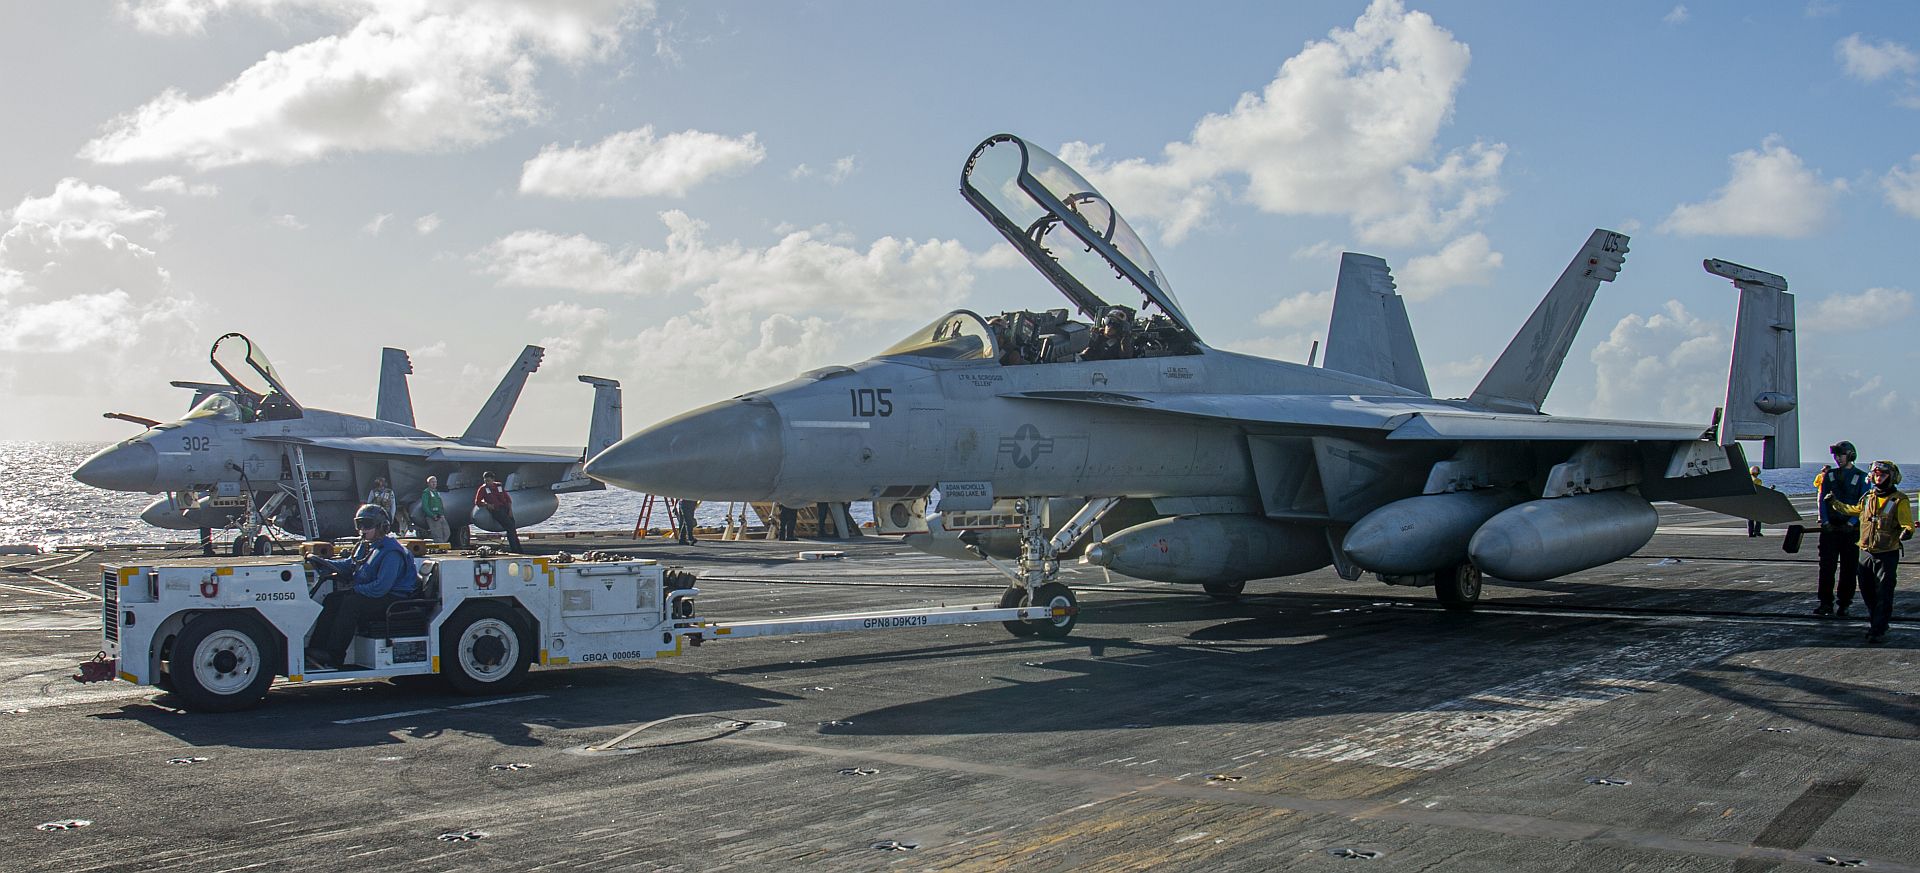 18F Super Hornet From The Fighting Redcocks Of Strike Fighter Squadron 22 Taxis Aboard The Aircraft Carrier USS Nimitz